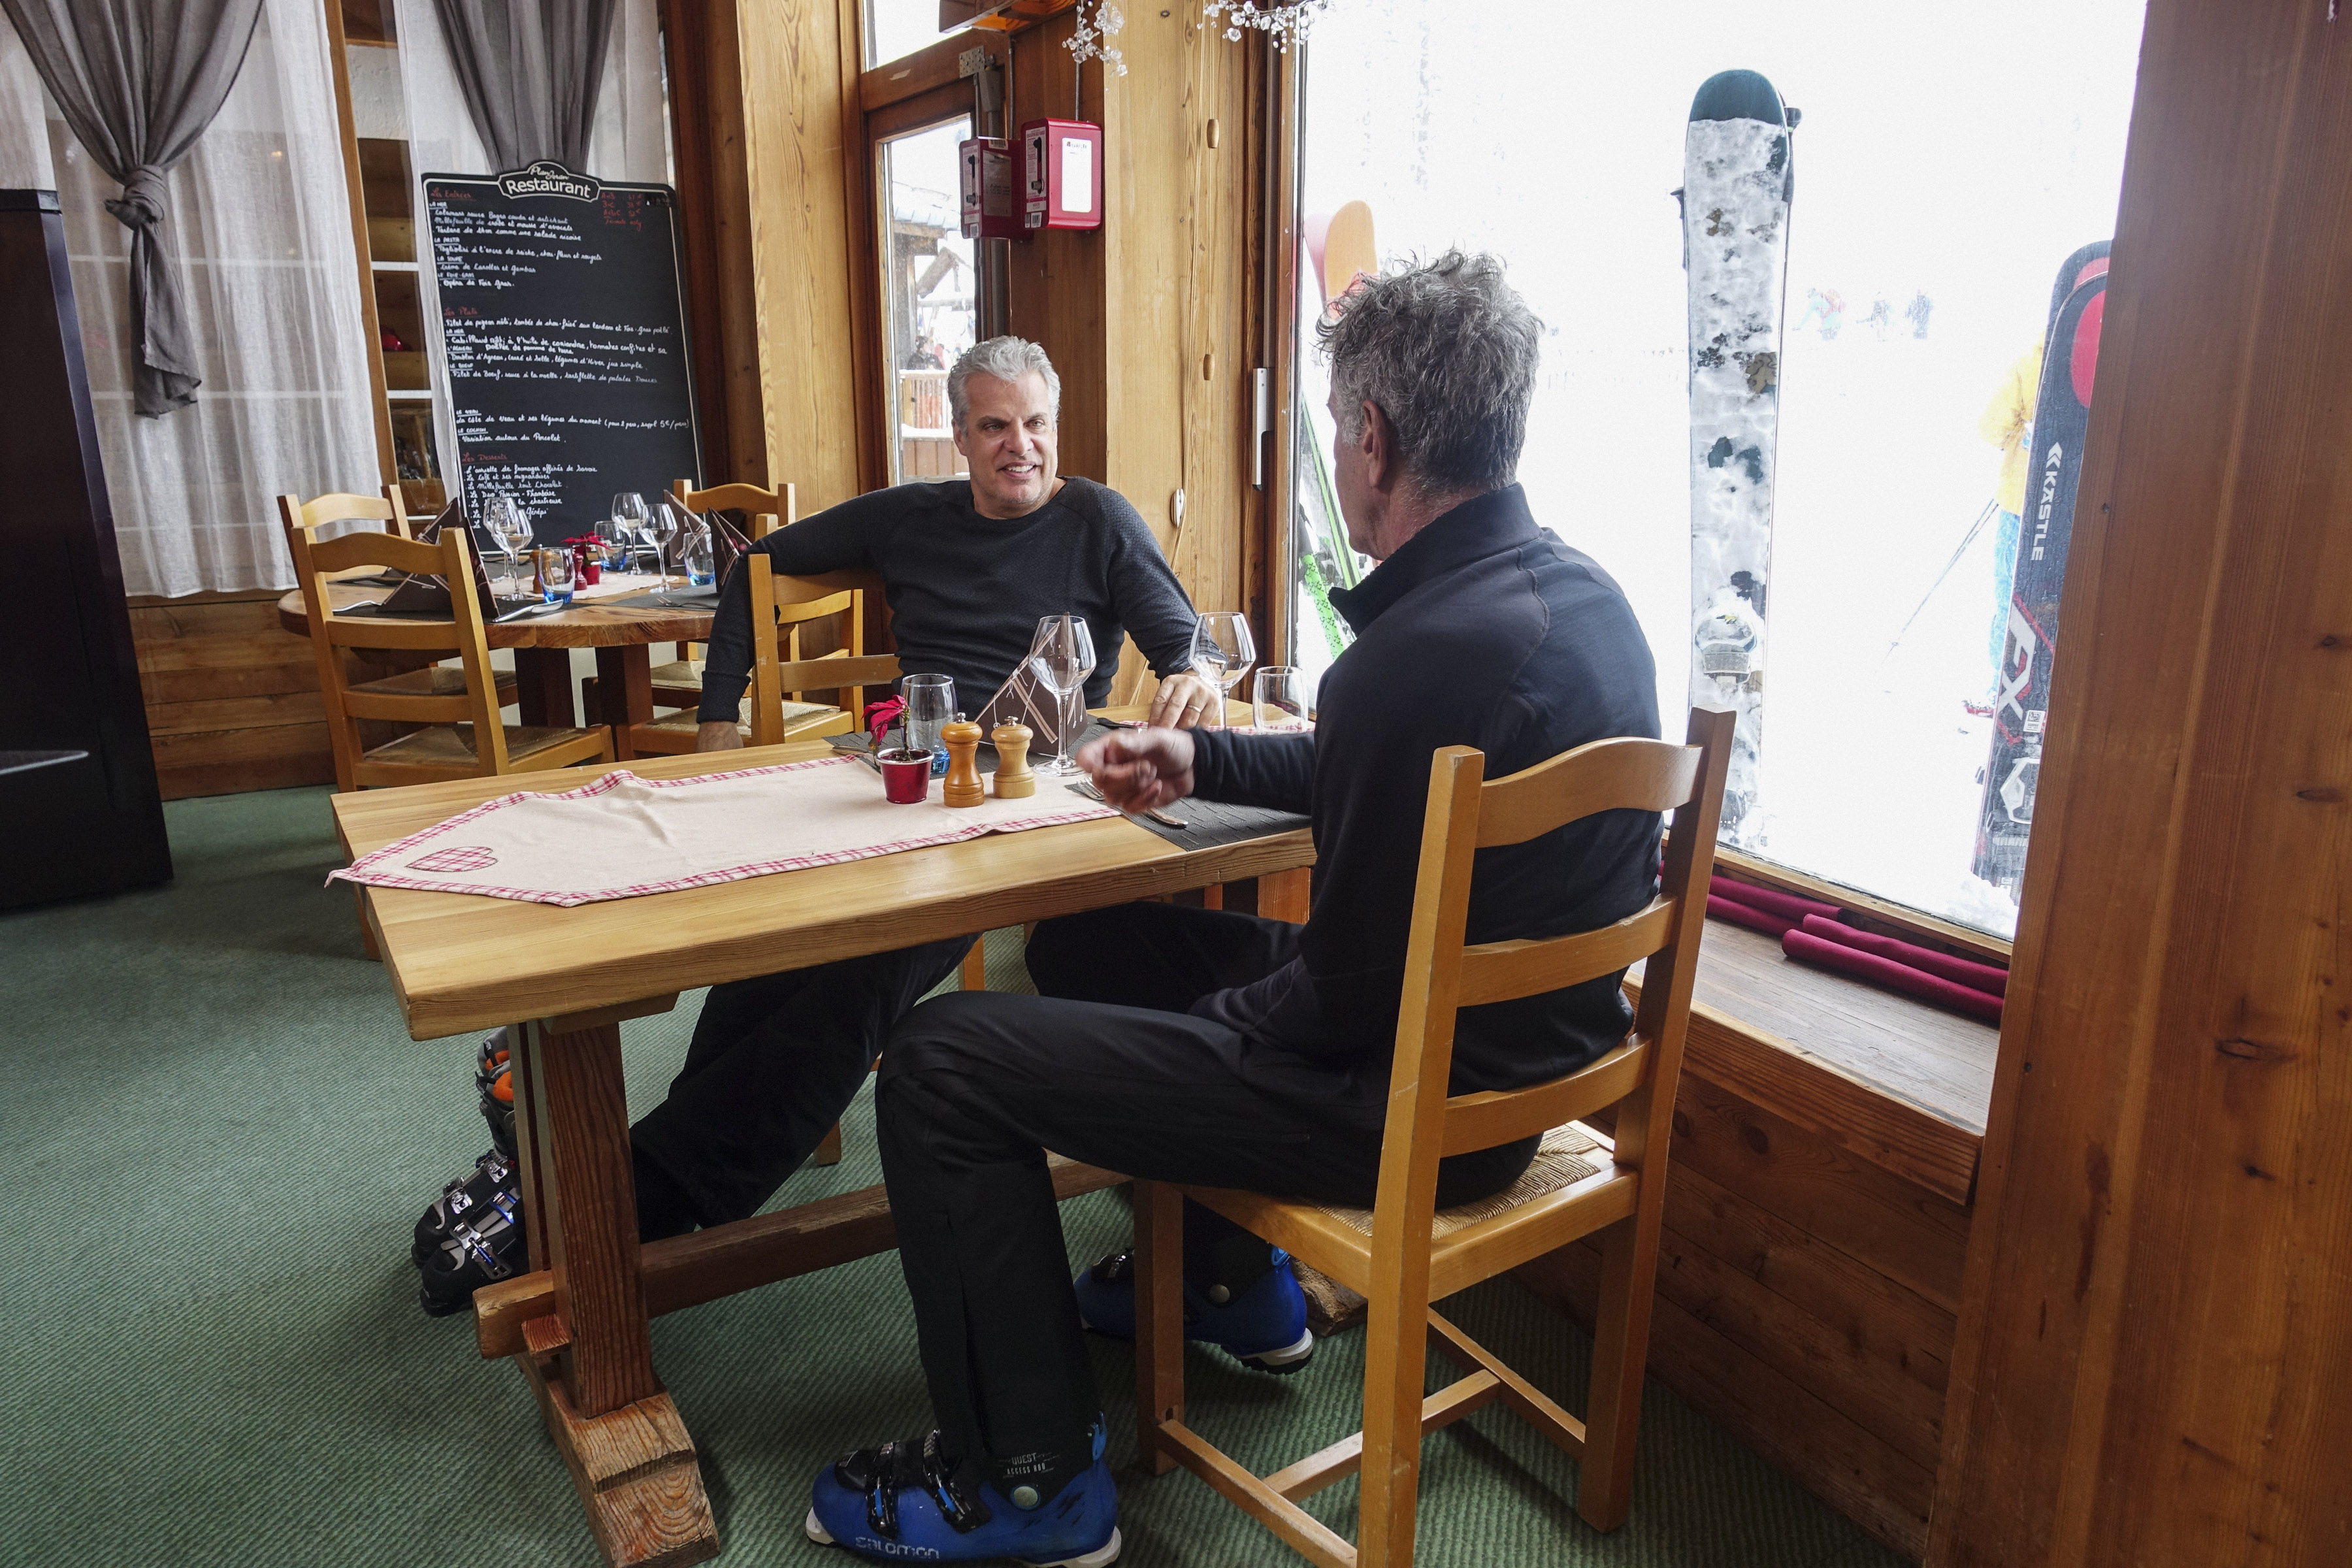 Eric Ripert and Anthony Bourdain sitting at a table during a scene from Parts Unknown.